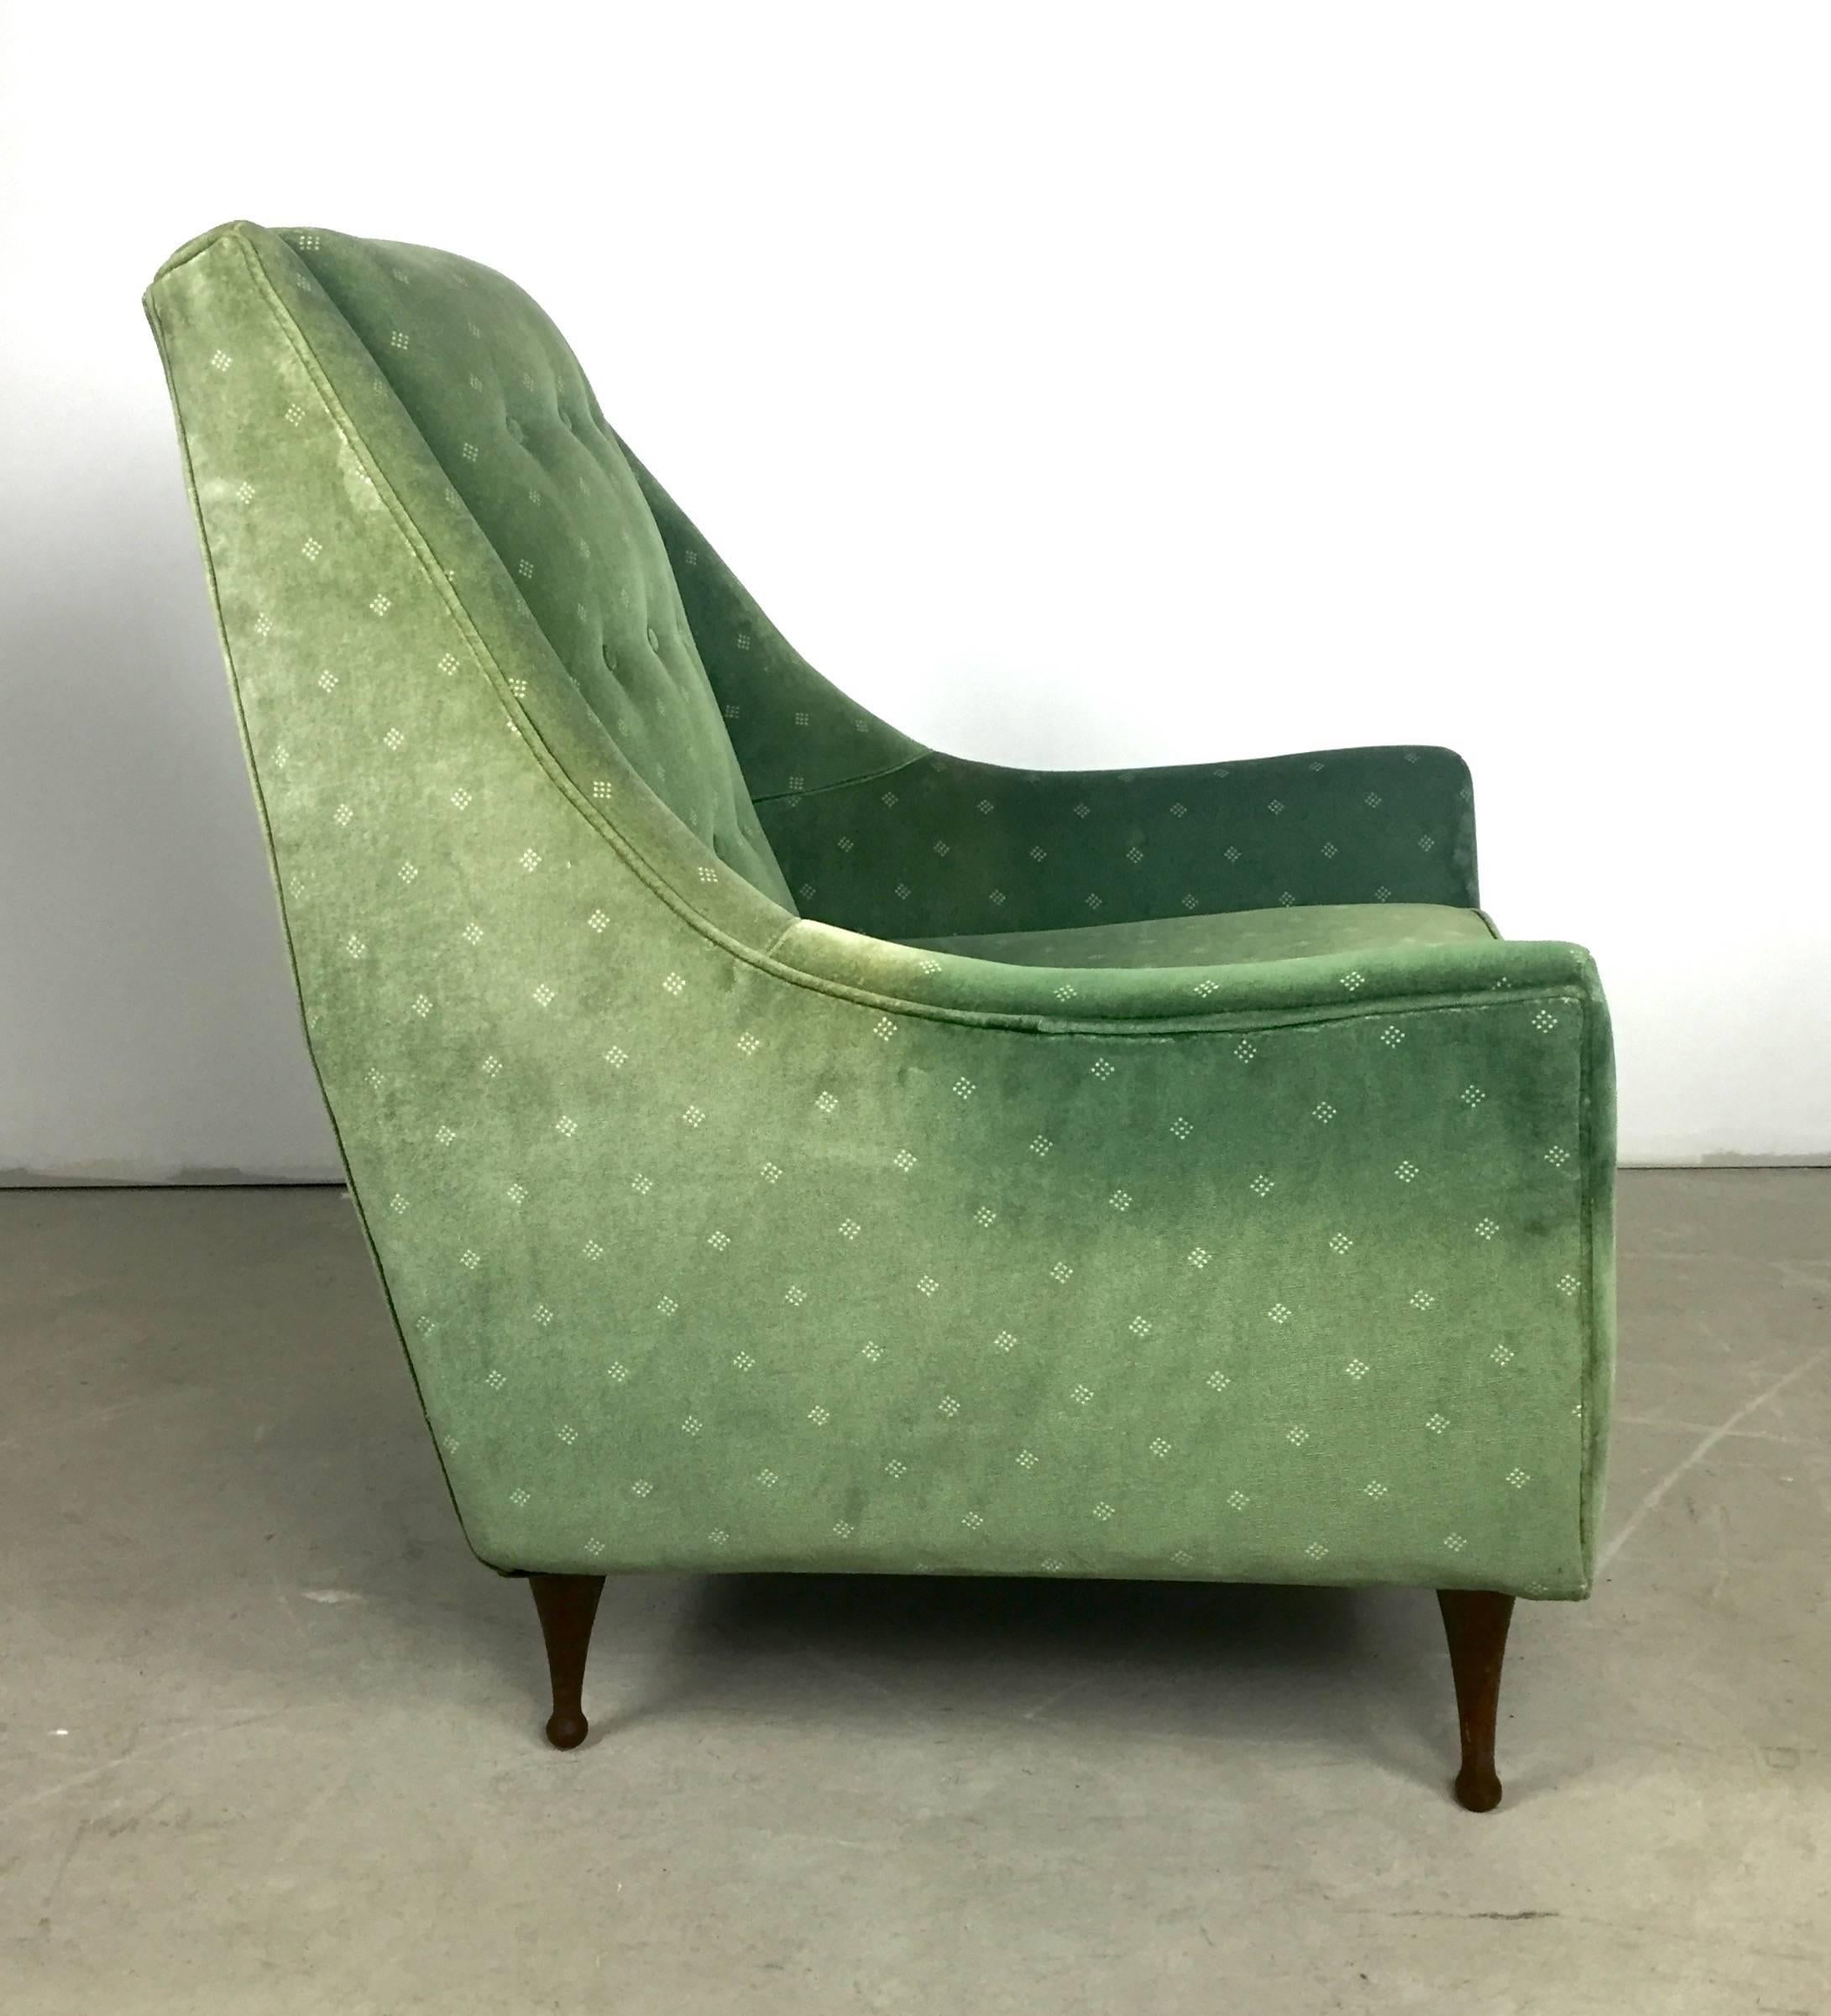 Mid century lounge by the Flexsteel Company.  Chair is similar in style to the chair designed by Paul Mccobb . Patterned Green Velvet Upholstery & Turned Walnut legs.  